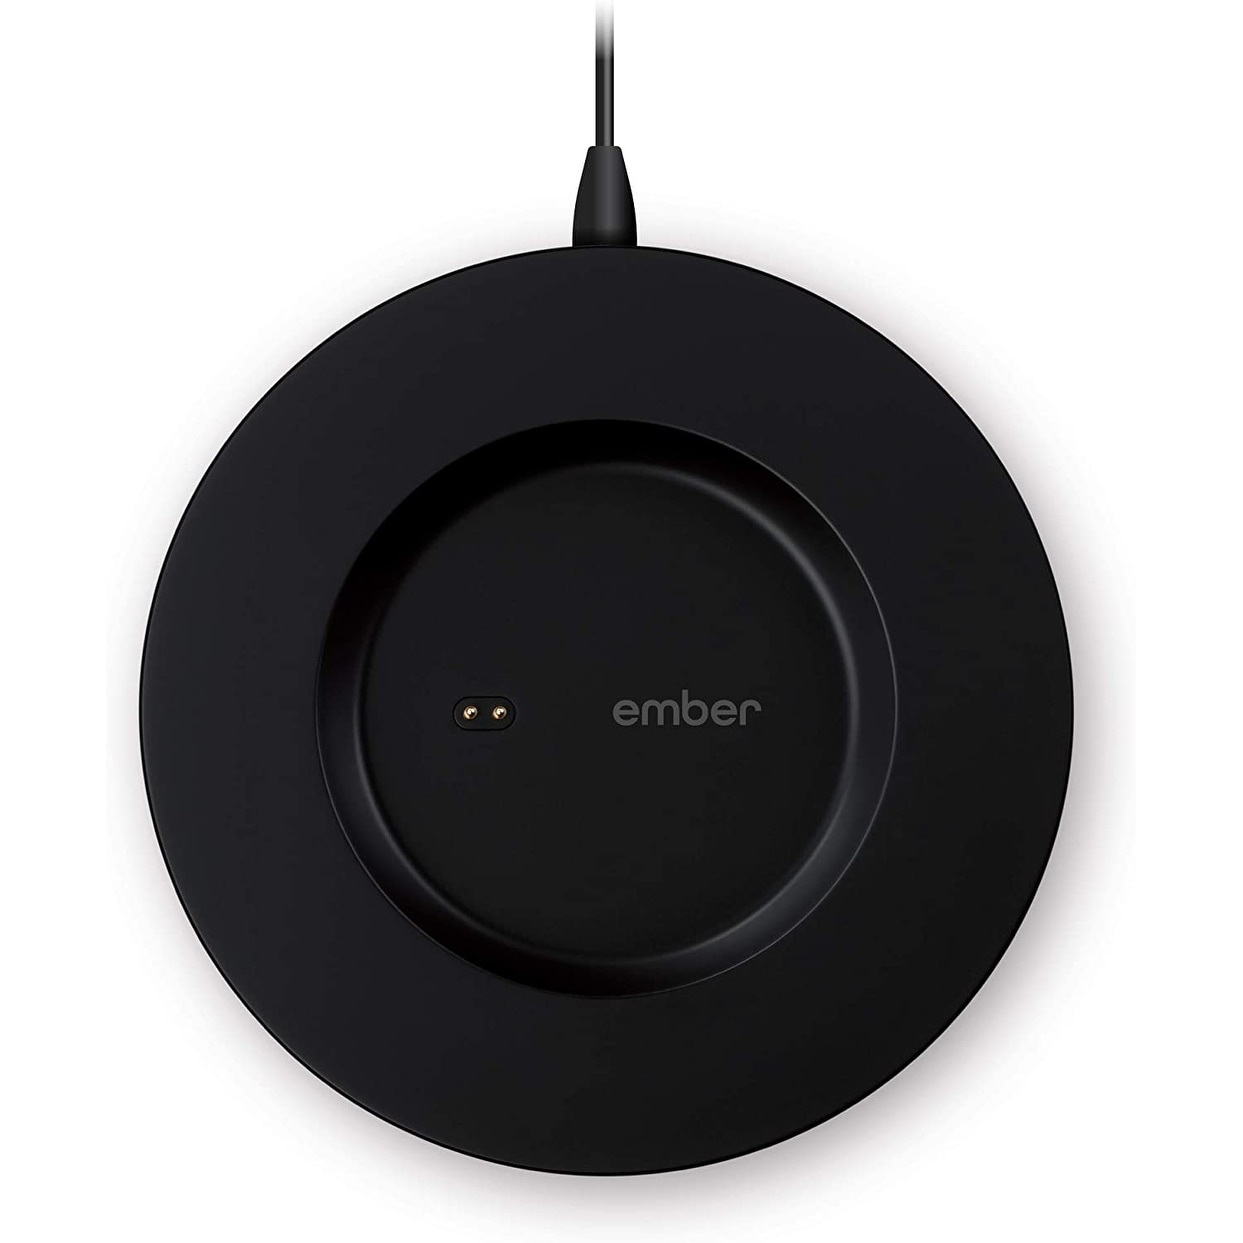 Ember Charging Coaster 2, Black - for use with Ember Temperature Control Smart Mug